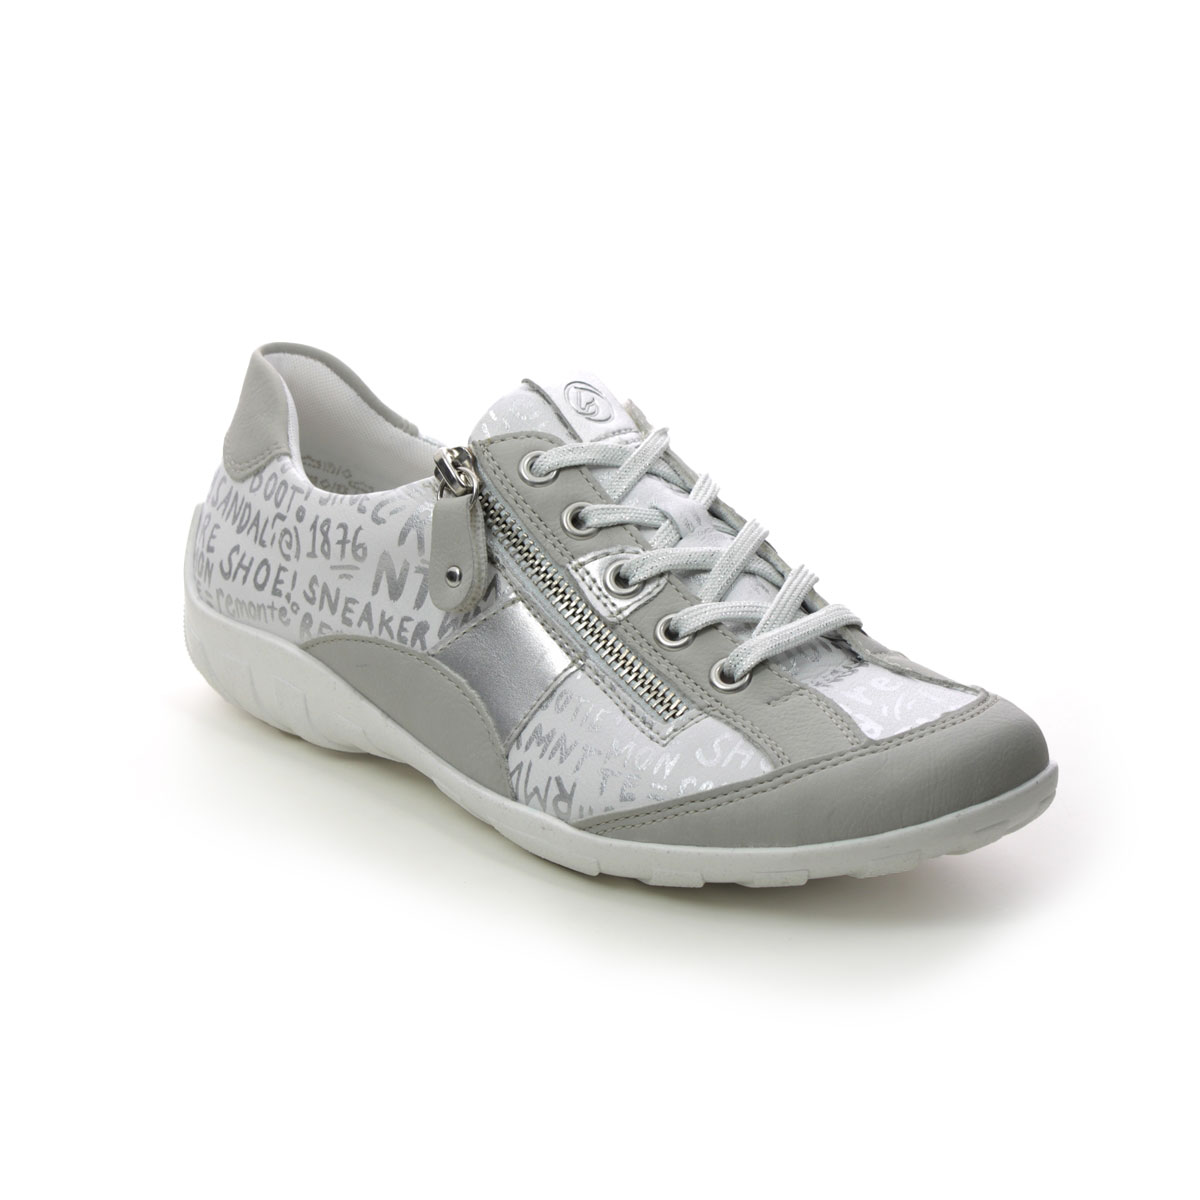 Remonte Livtext 21 Light Grey Leather Womens Lacing Shoes R3403-80 In Size 36 In Plain Light Grey Leather